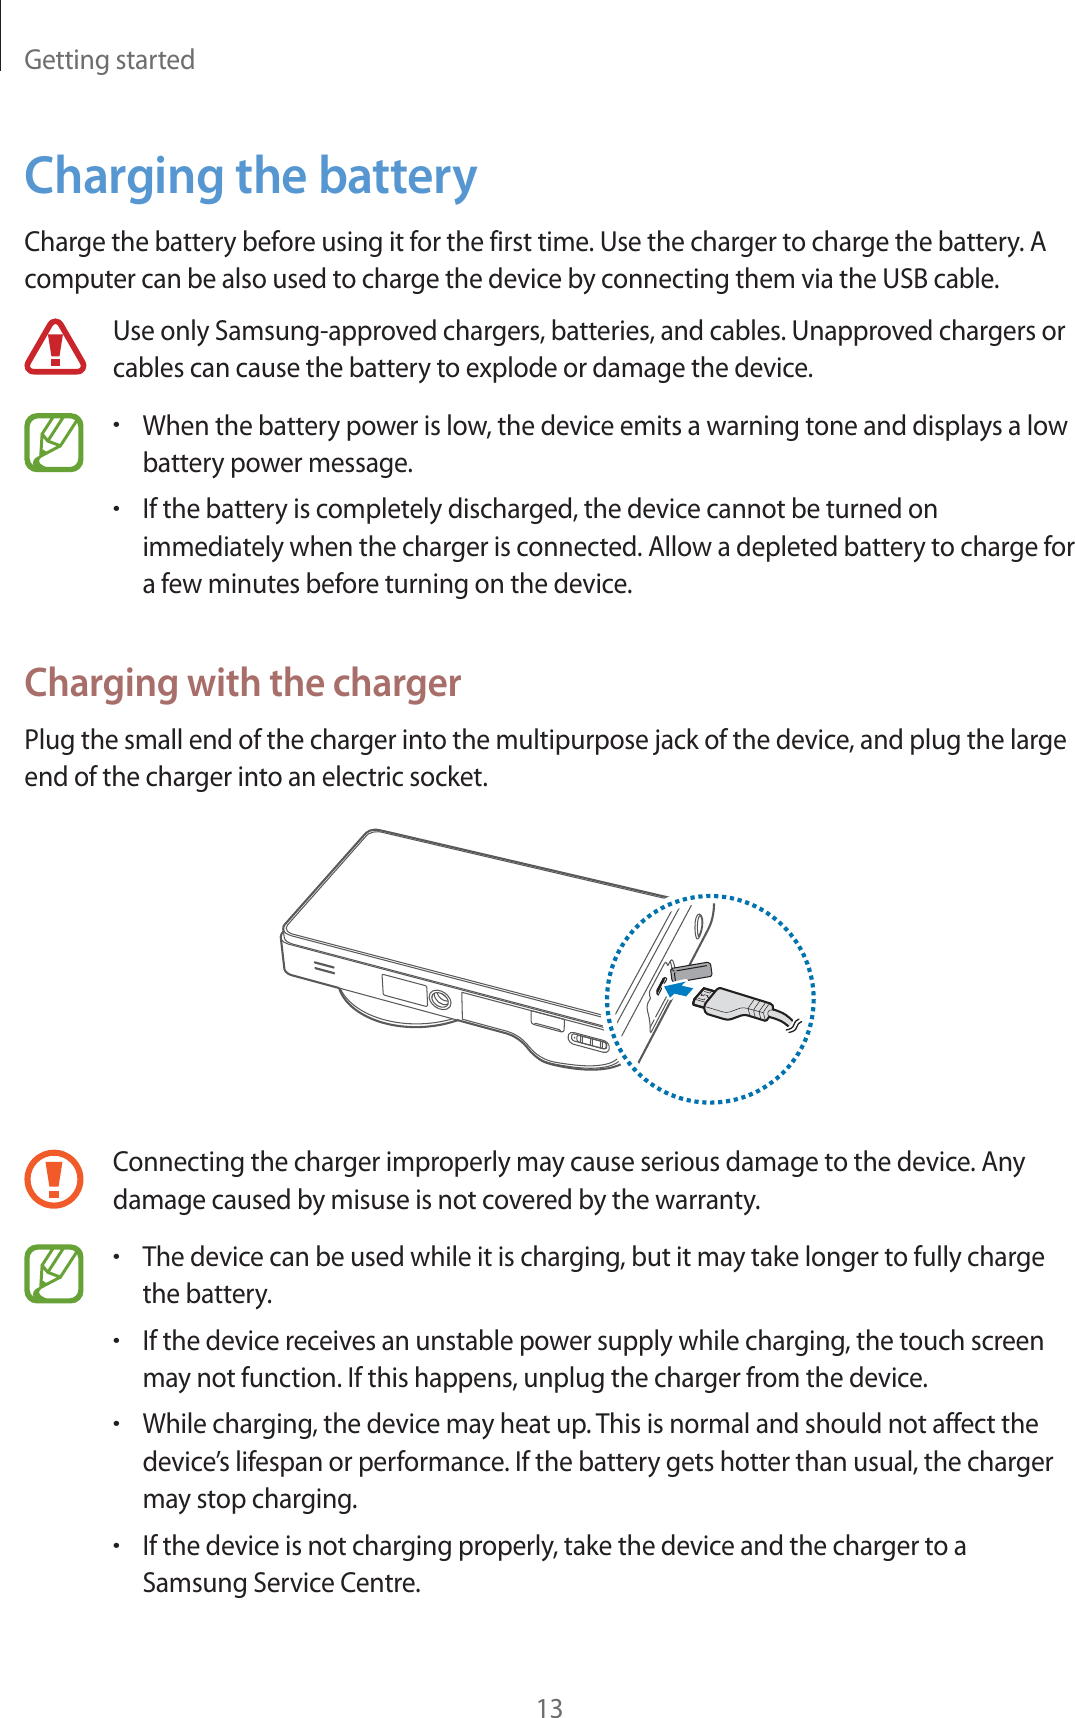 Getting started13Charging the batteryCharge the battery before using it for the first time. Use the charger to charge the battery. A computer can be also used to charge the device by connecting them via the USB cable.Use only Samsung-approved chargers, batteries, and cables. Unapproved chargers or cables can cause the battery to explode or damage the device.rWhen the battery power is low, the device emits a warning tone and displays a low battery power message.rIf the battery is completely discharged, the device cannot be turned on immediately when the charger is connected. Allow a depleted battery to charge for a few minutes before turning on the device.Charging with the chargerPlug the small end of the charger into the multipurpose jack of the device, and plug the large end of the charger into an electric socket.Connecting the charger improperly may cause serious damage to the device. Any damage caused by misuse is not covered by the warranty.rThe device can be used while it is charging, but it may take longer to fully charge the battery.rIf the device receives an unstable power supply while charging, the touch screen may not function. If this happens, unplug the charger from the device.rWhile charging, the device may heat up. This is normal and should not affect the device’s lifespan or performance. If the battery gets hotter than usual, the charger may stop charging.rIf the device is not charging properly, take the device and the charger to a Samsung Service Centre.